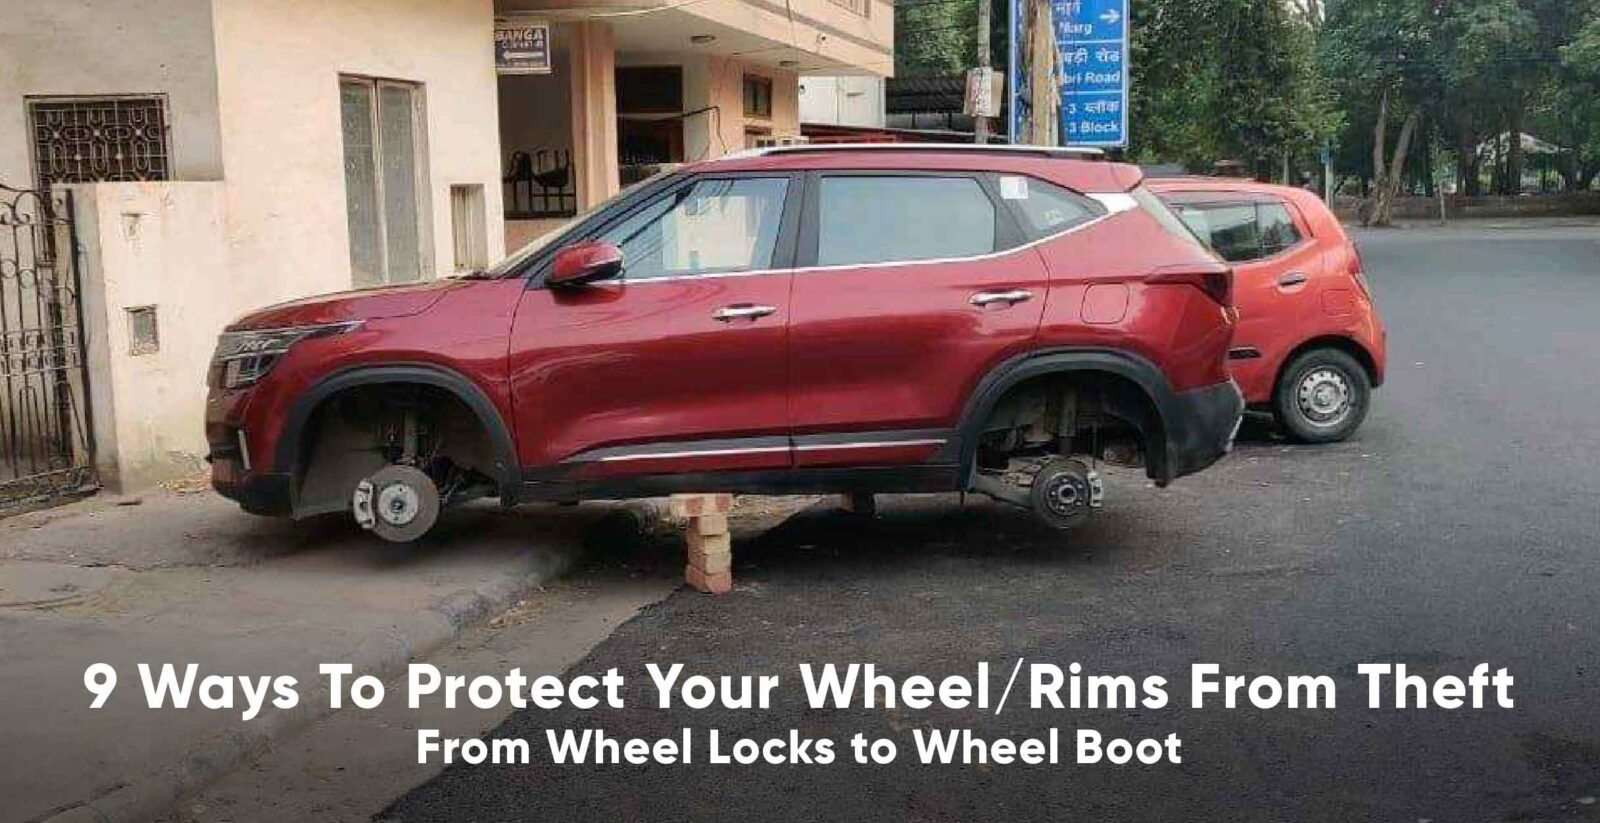 How to Protect Wheels from Theft